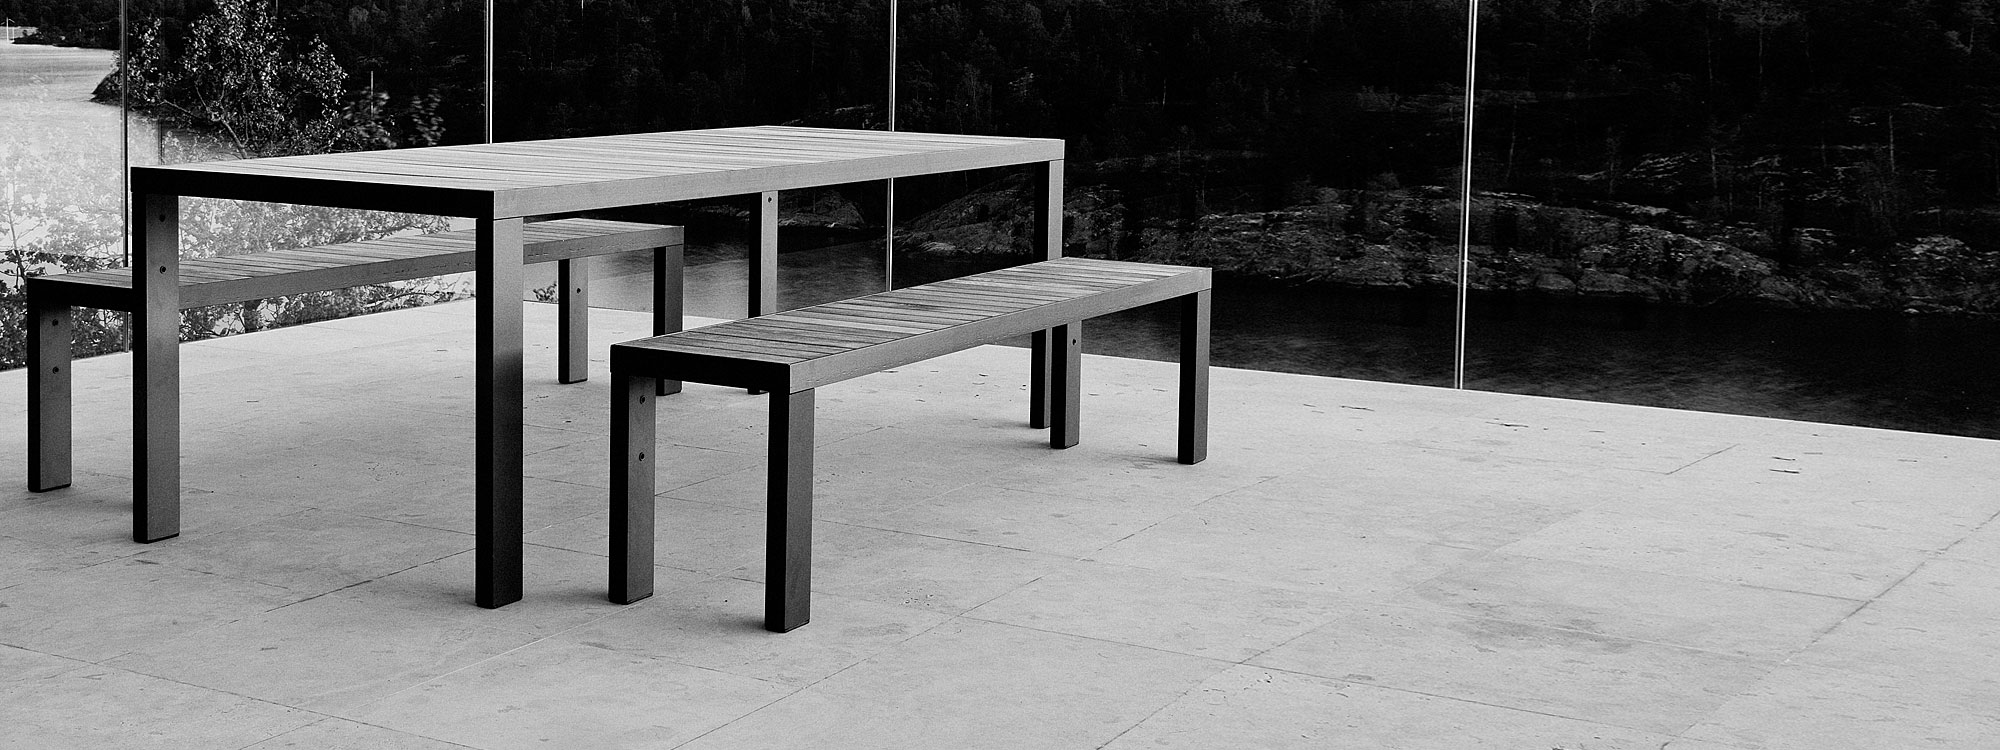 Monochrome image of Roshults modern garden table and benches